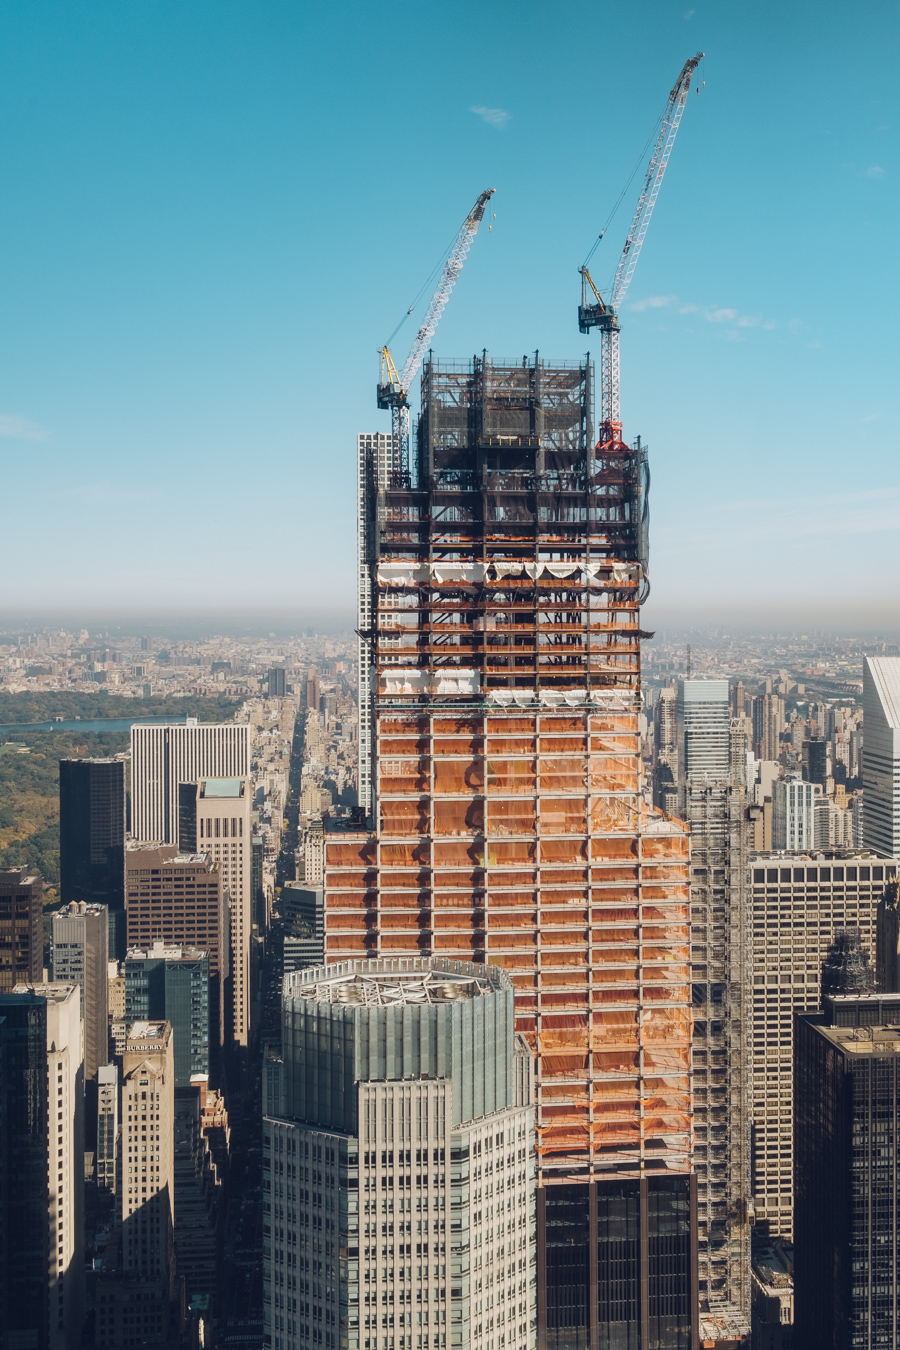 Photograph of the view from Summit One Vanderbilt by Alex Nichol